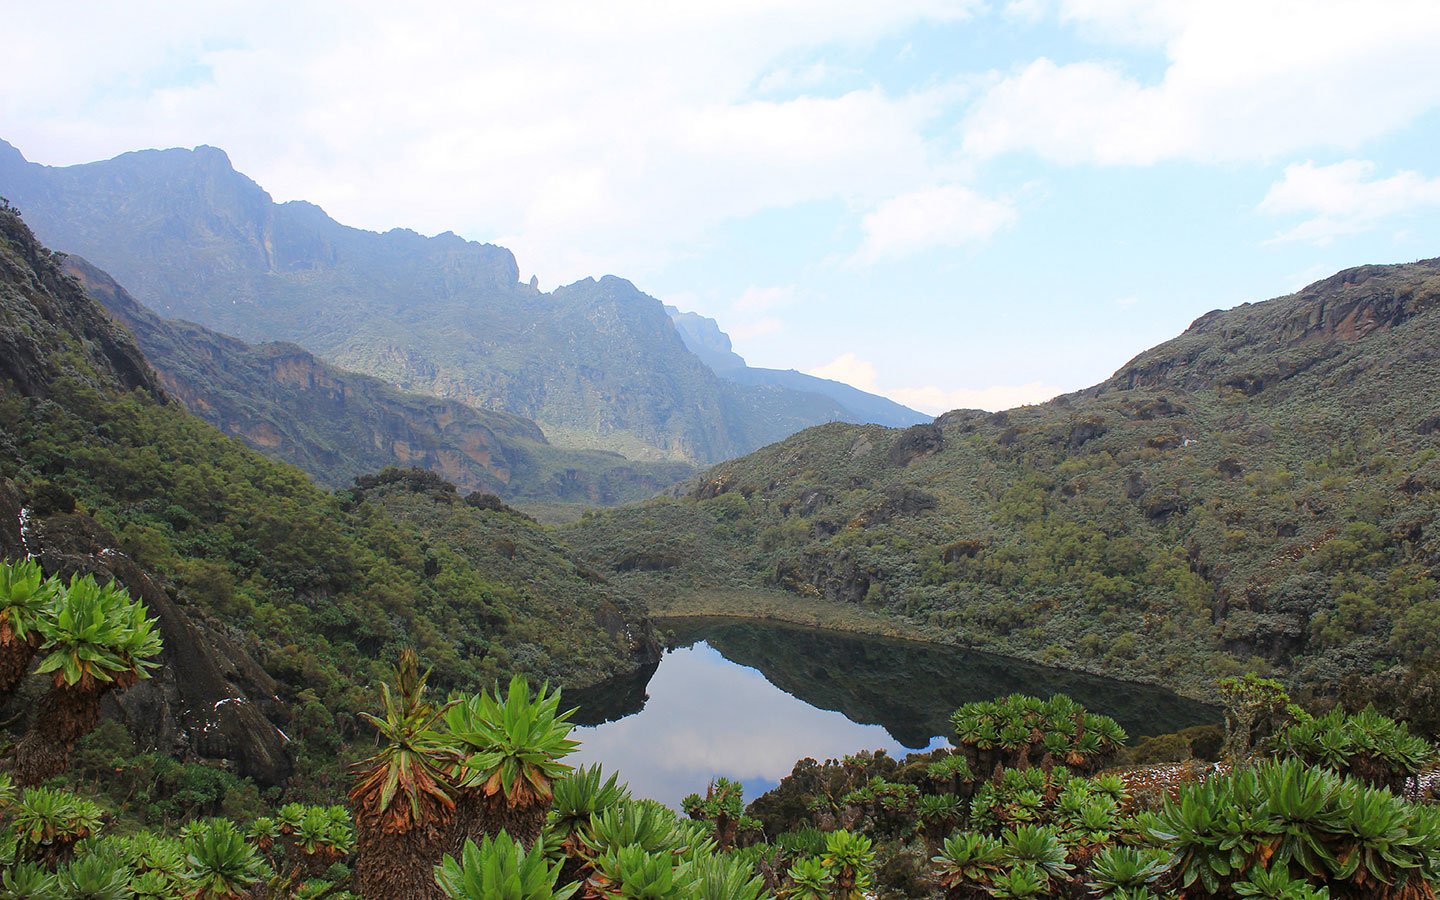 Rwenzori Mountains Filming From the Democratic Republic of Congo